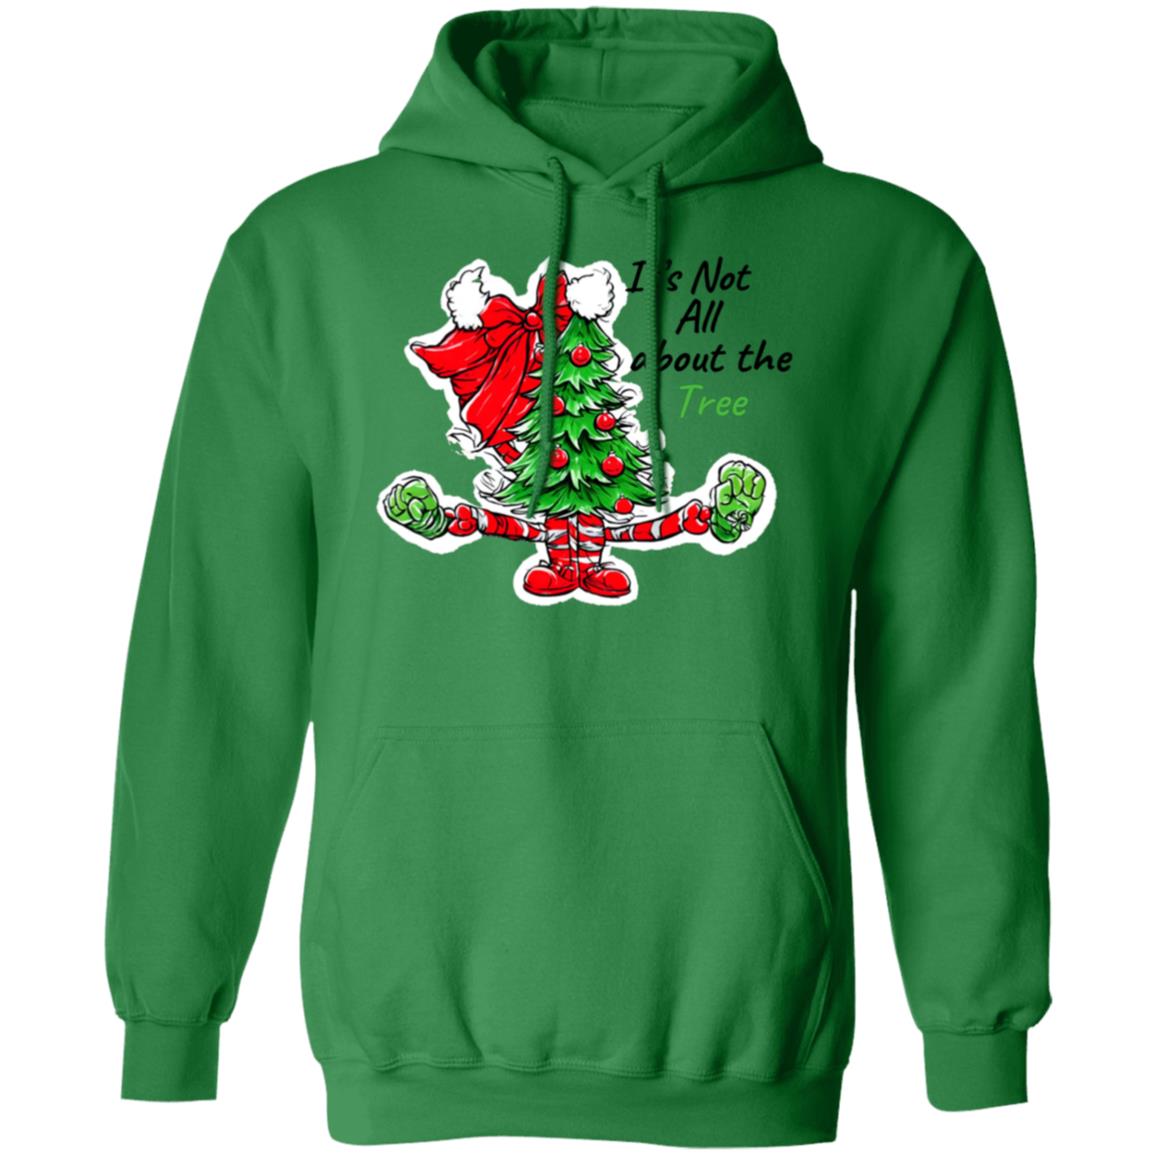 Not all about the tree It's not All About the Tree : Pullover Hoodie